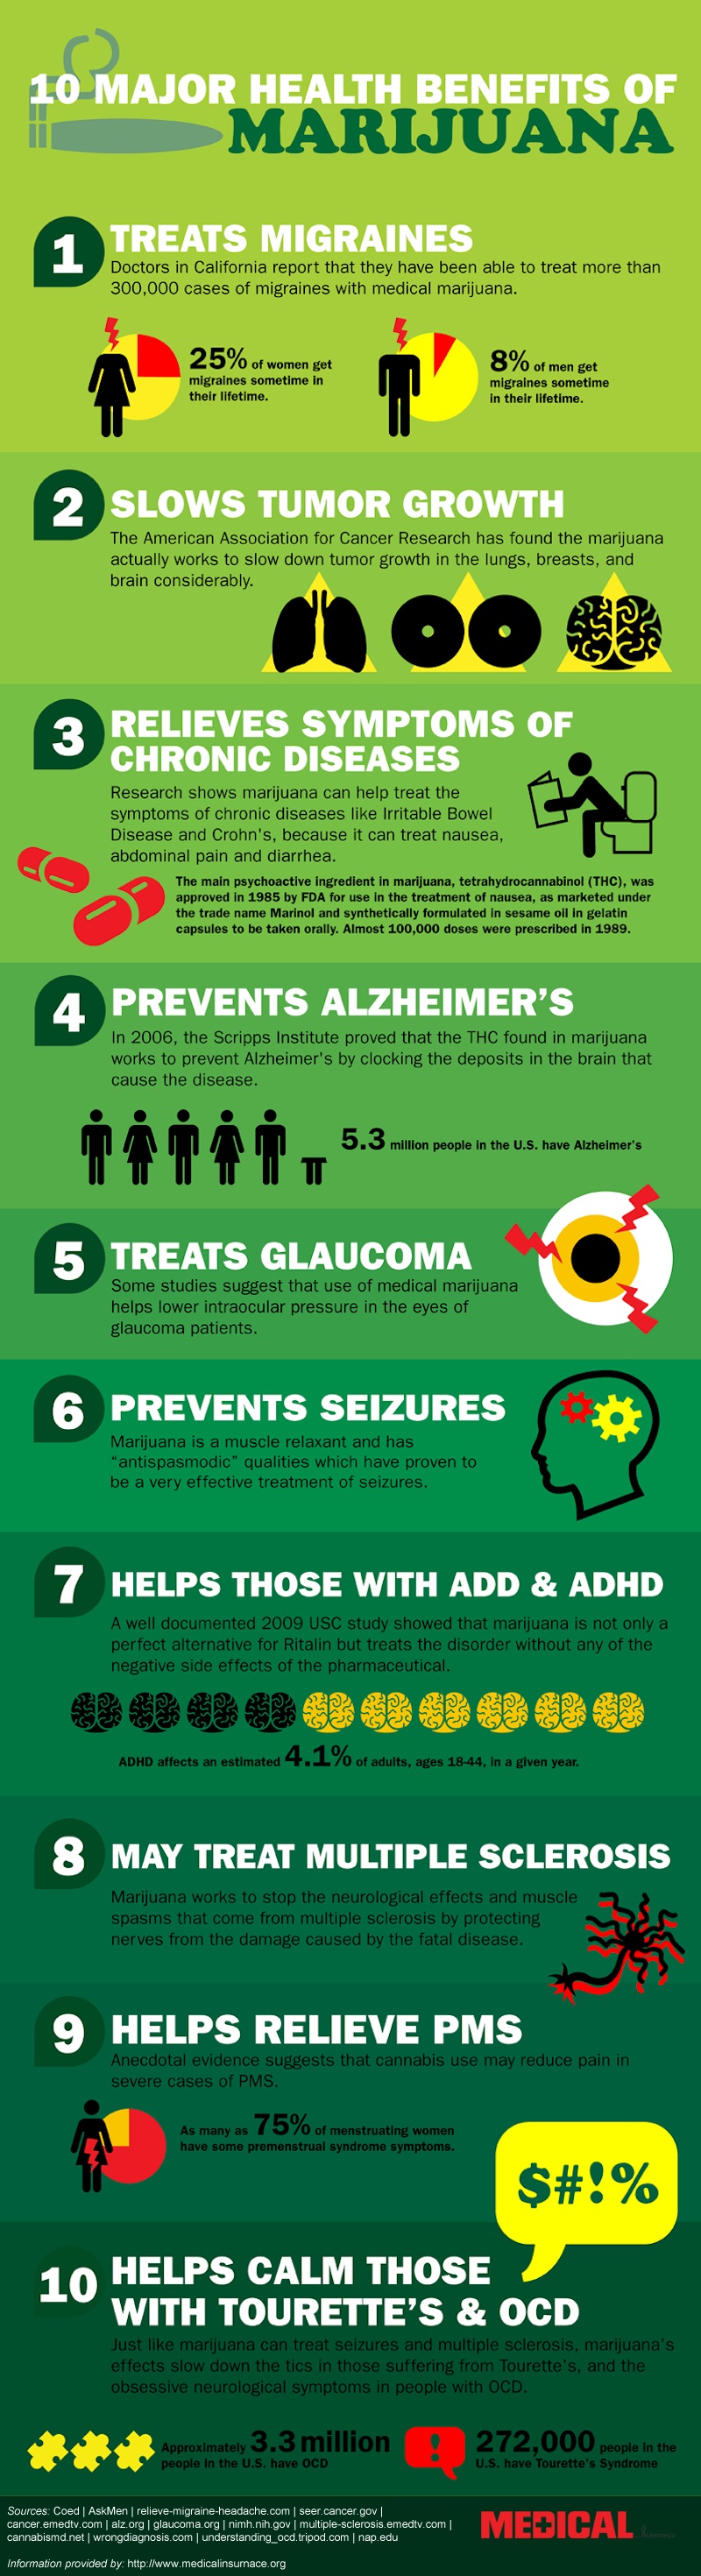 Facts About Medical Marijuana by mediorg on DeviantArt